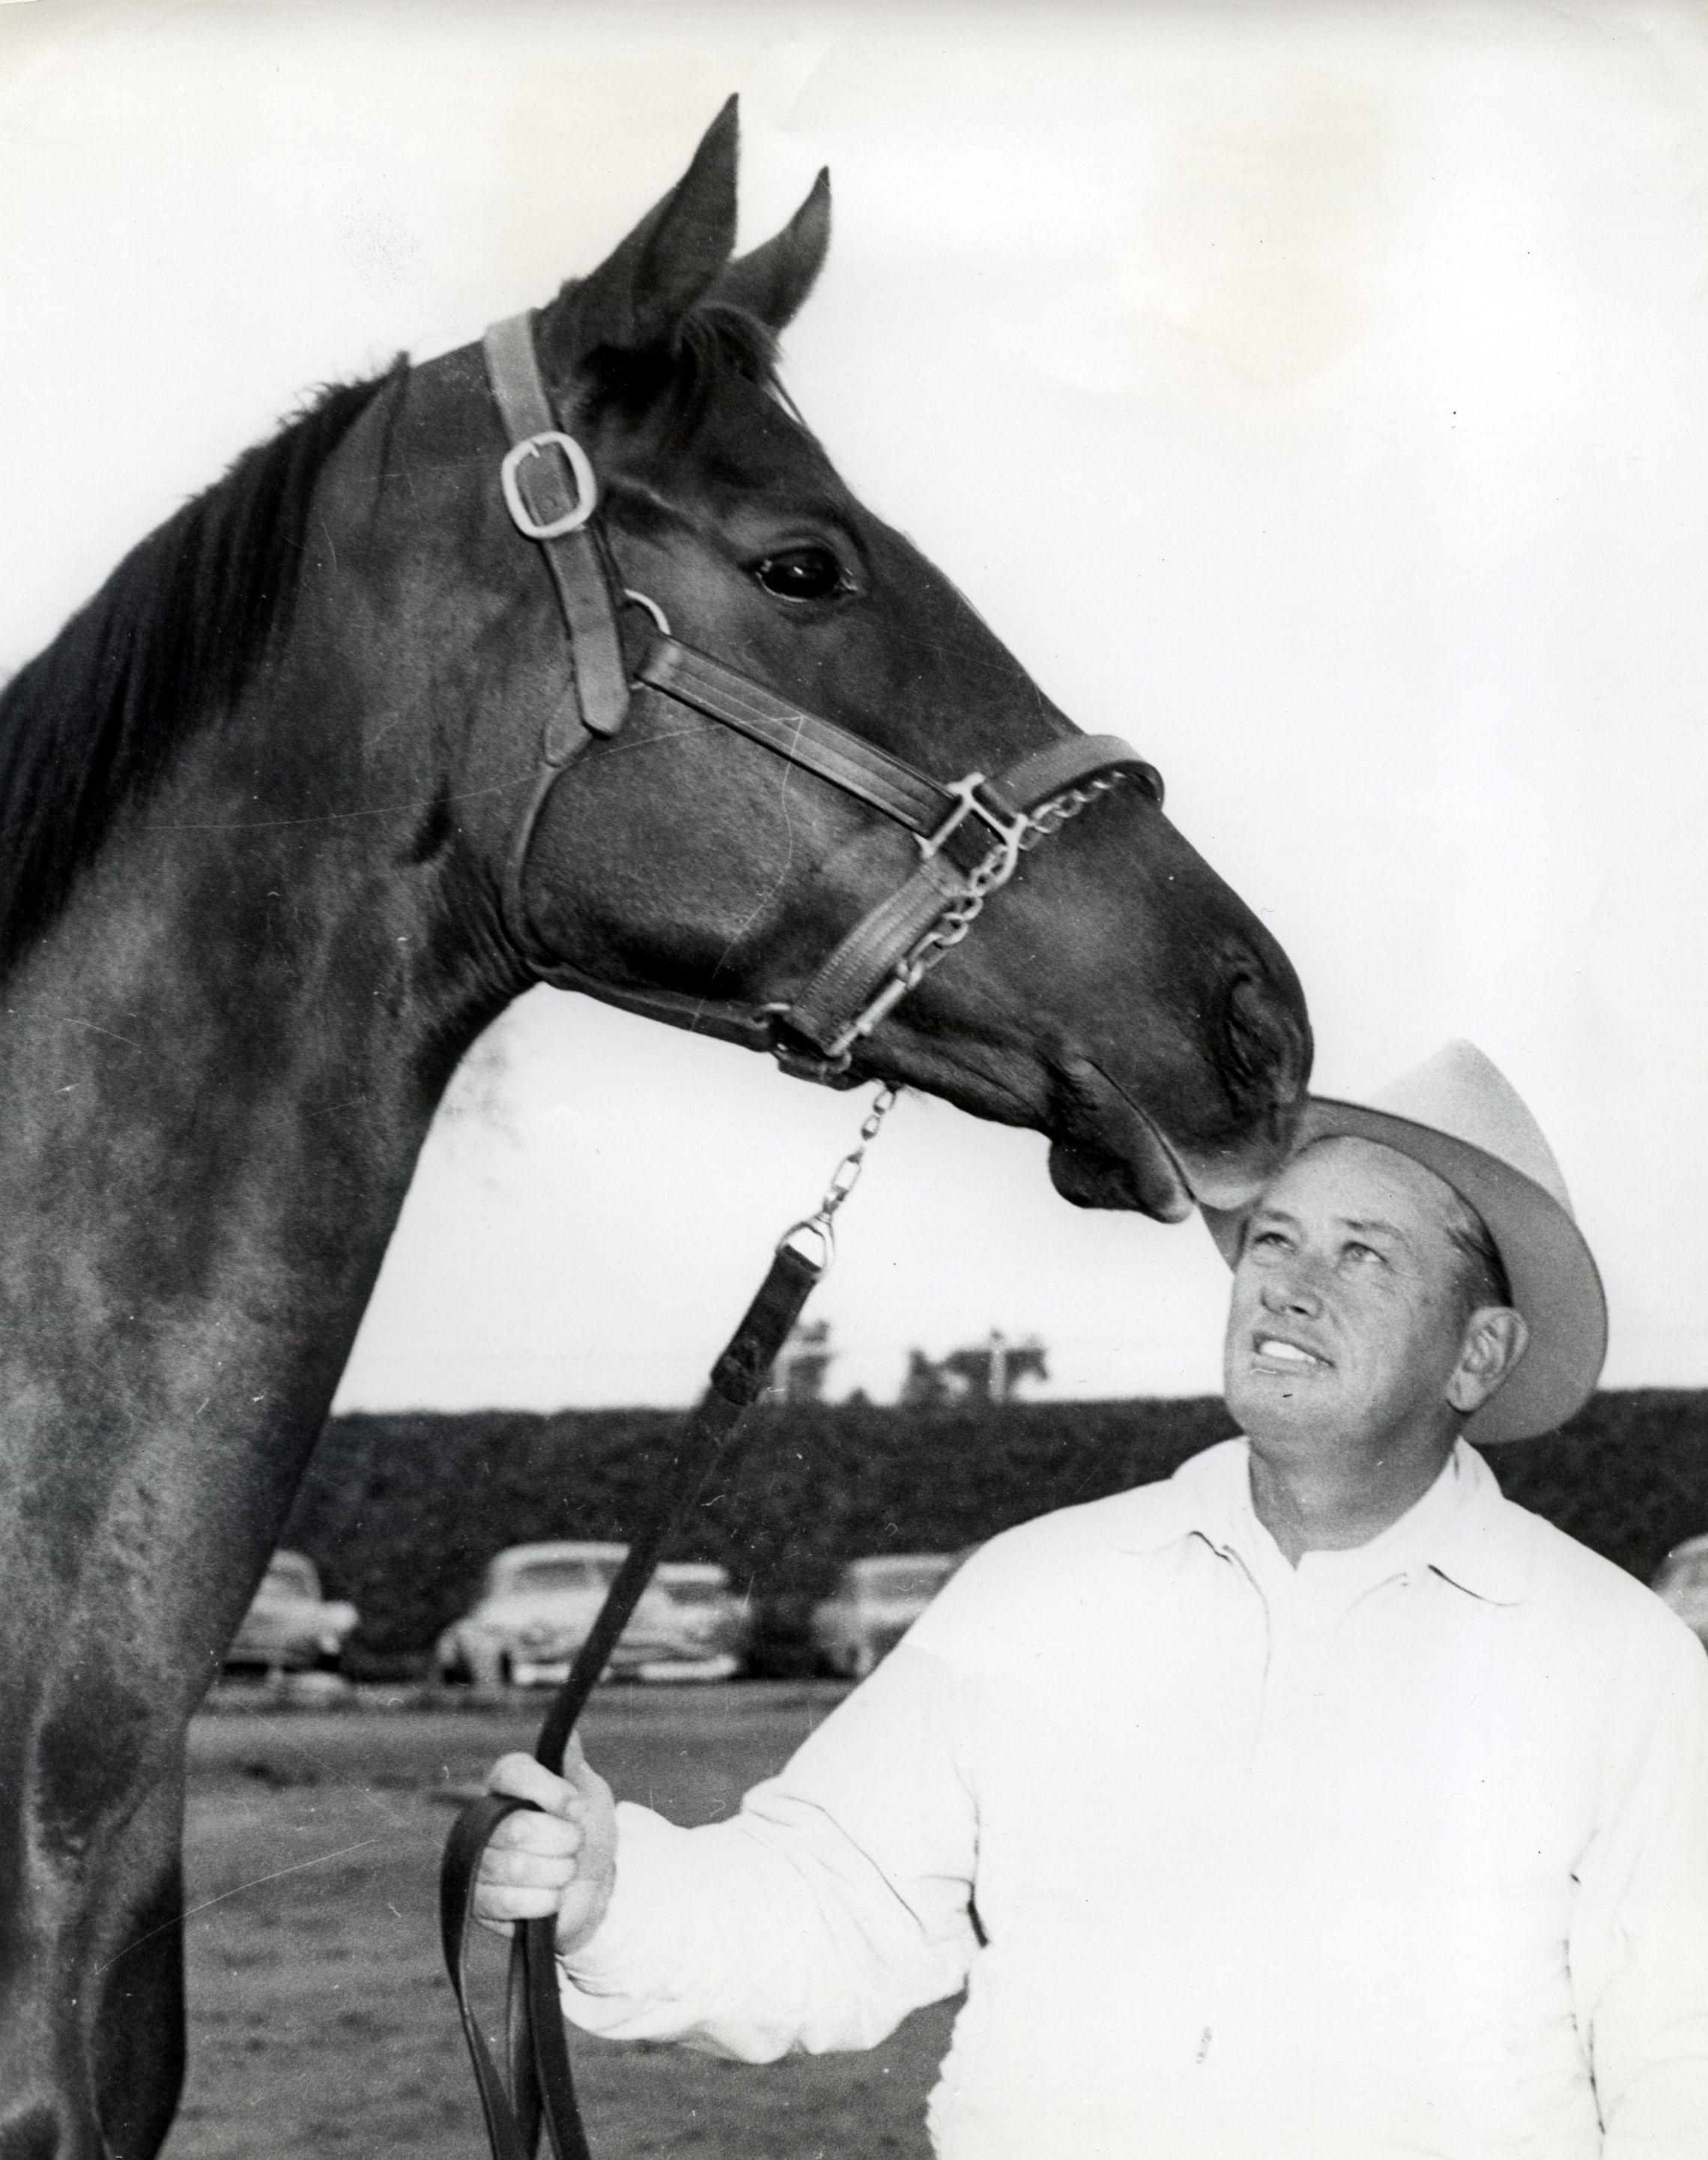 Silver Spoon and Robert Wheeler (Museum Collection)